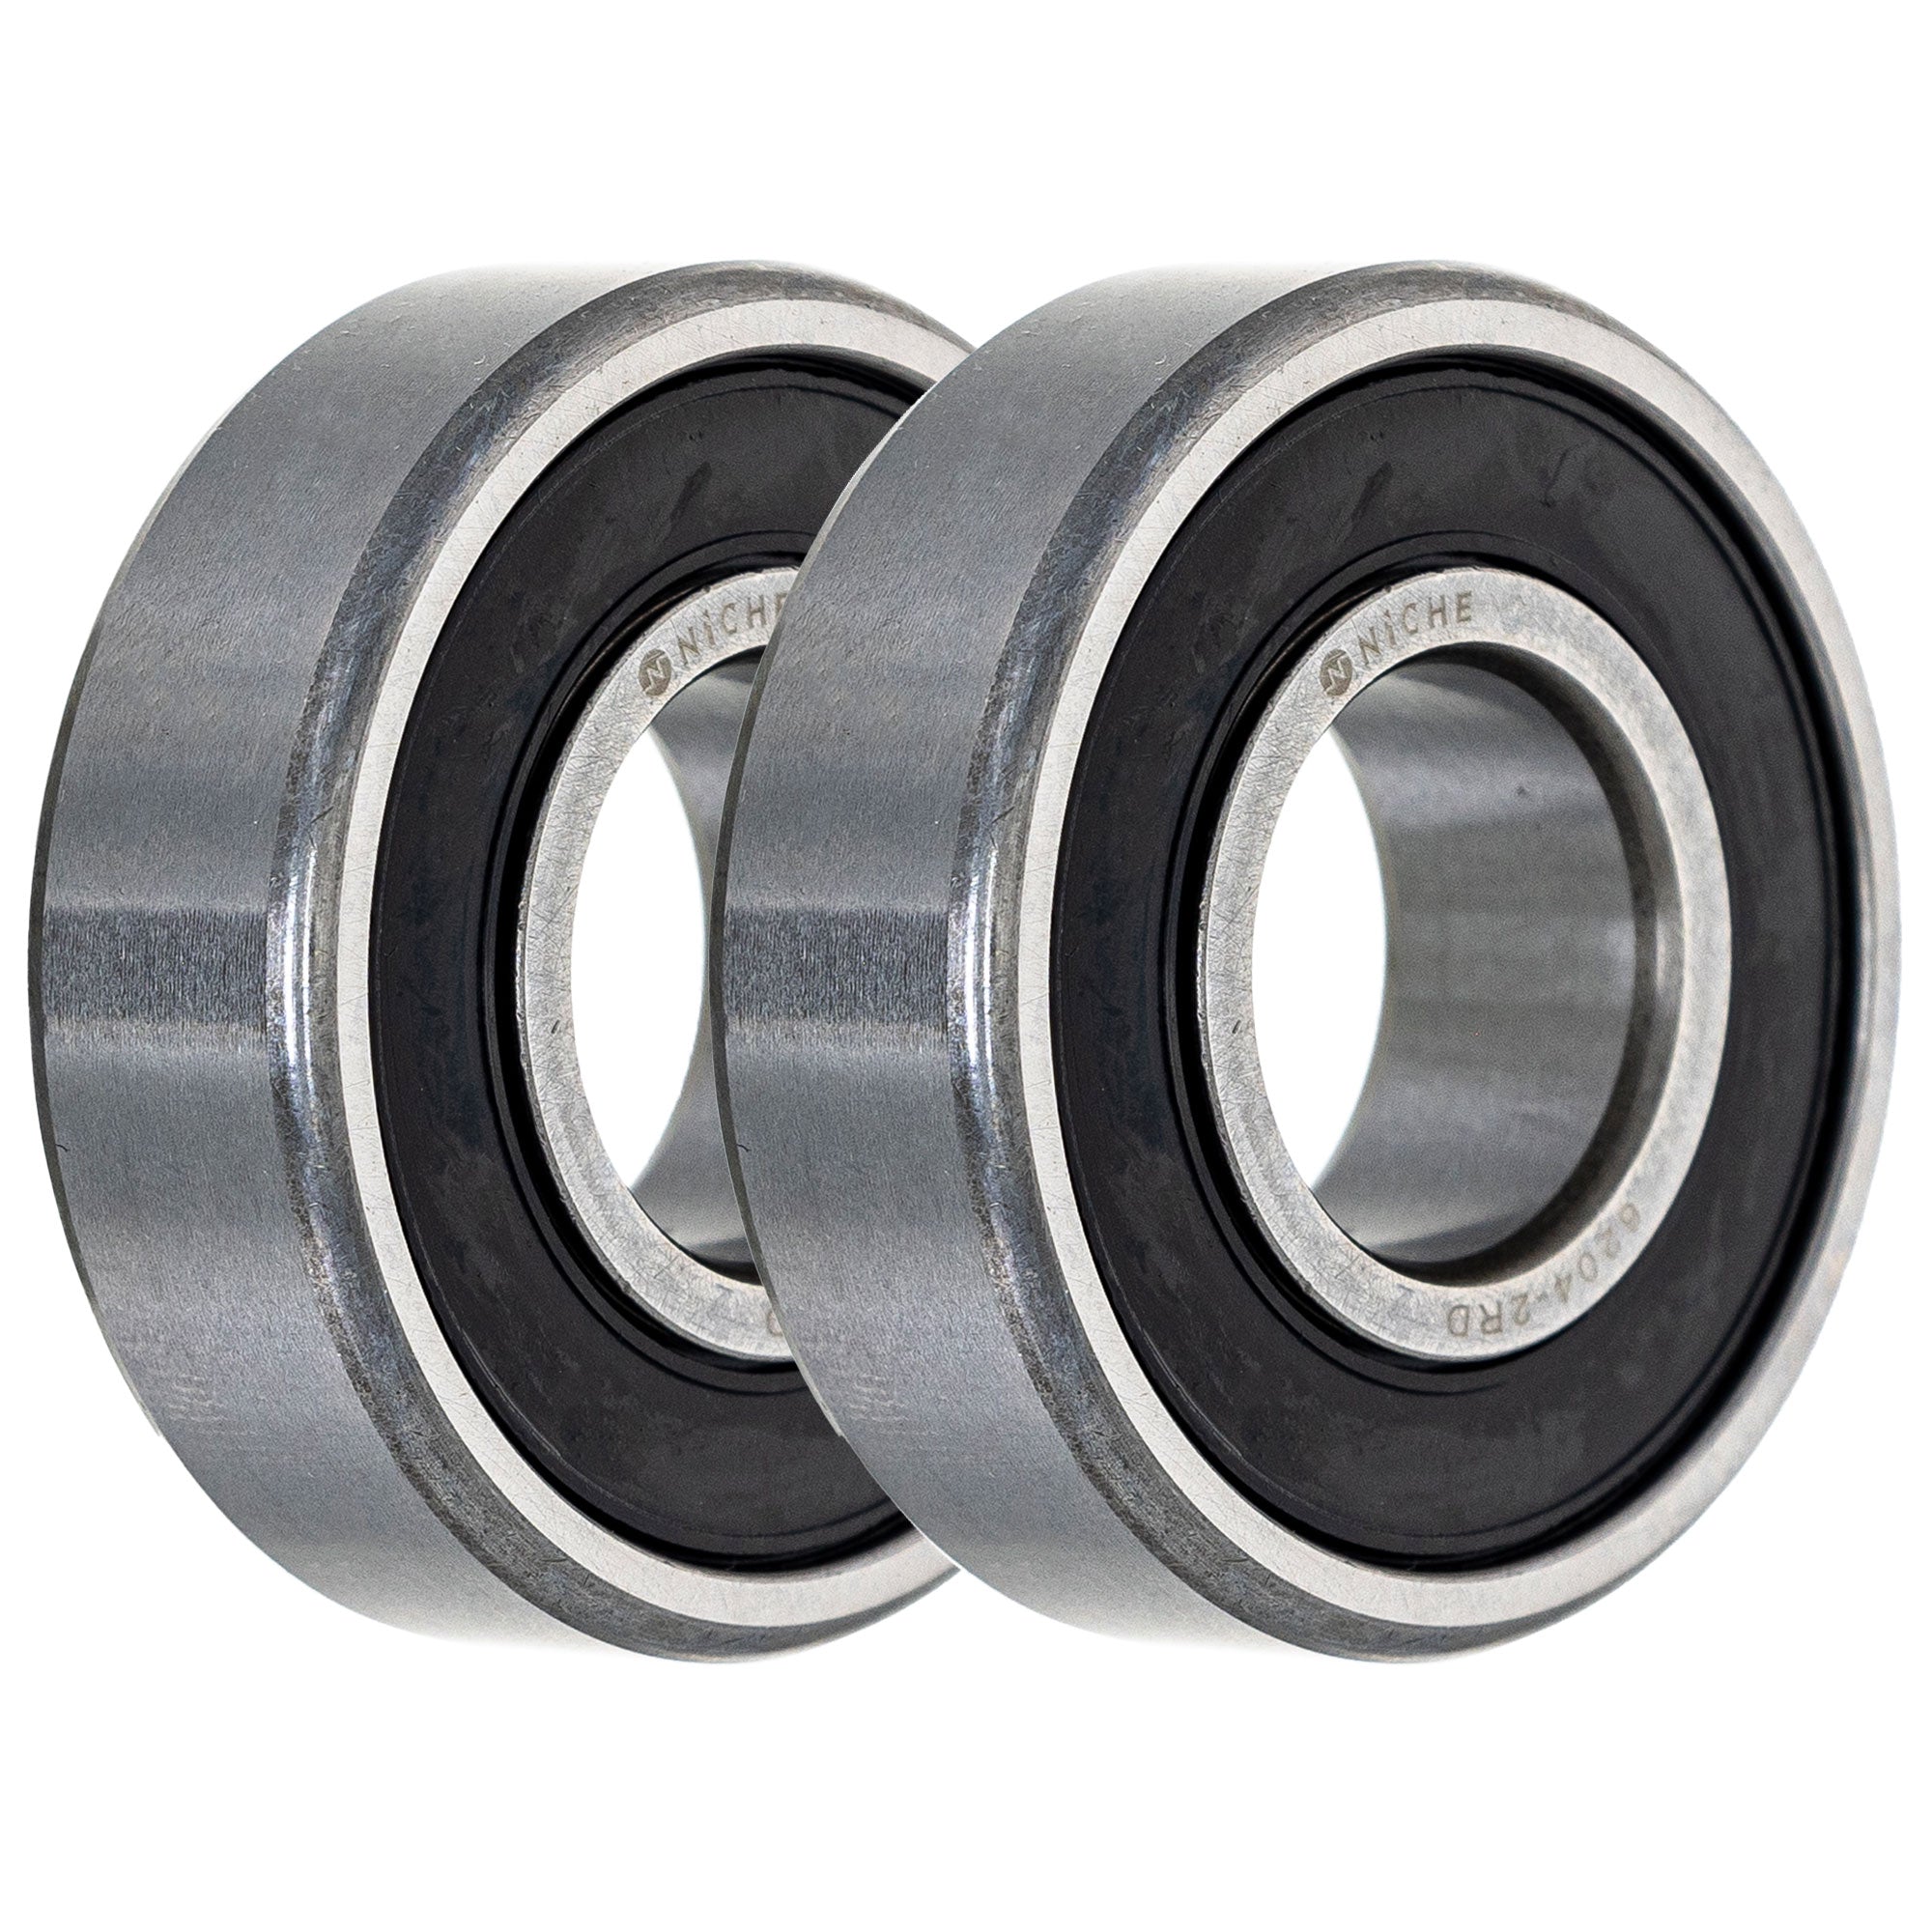 Electric Grade, Single Row, Deep Groove, Ball Bearing Pack of 2 2-Pack for zOTHER Snapper NICHE 519-CBB2212R